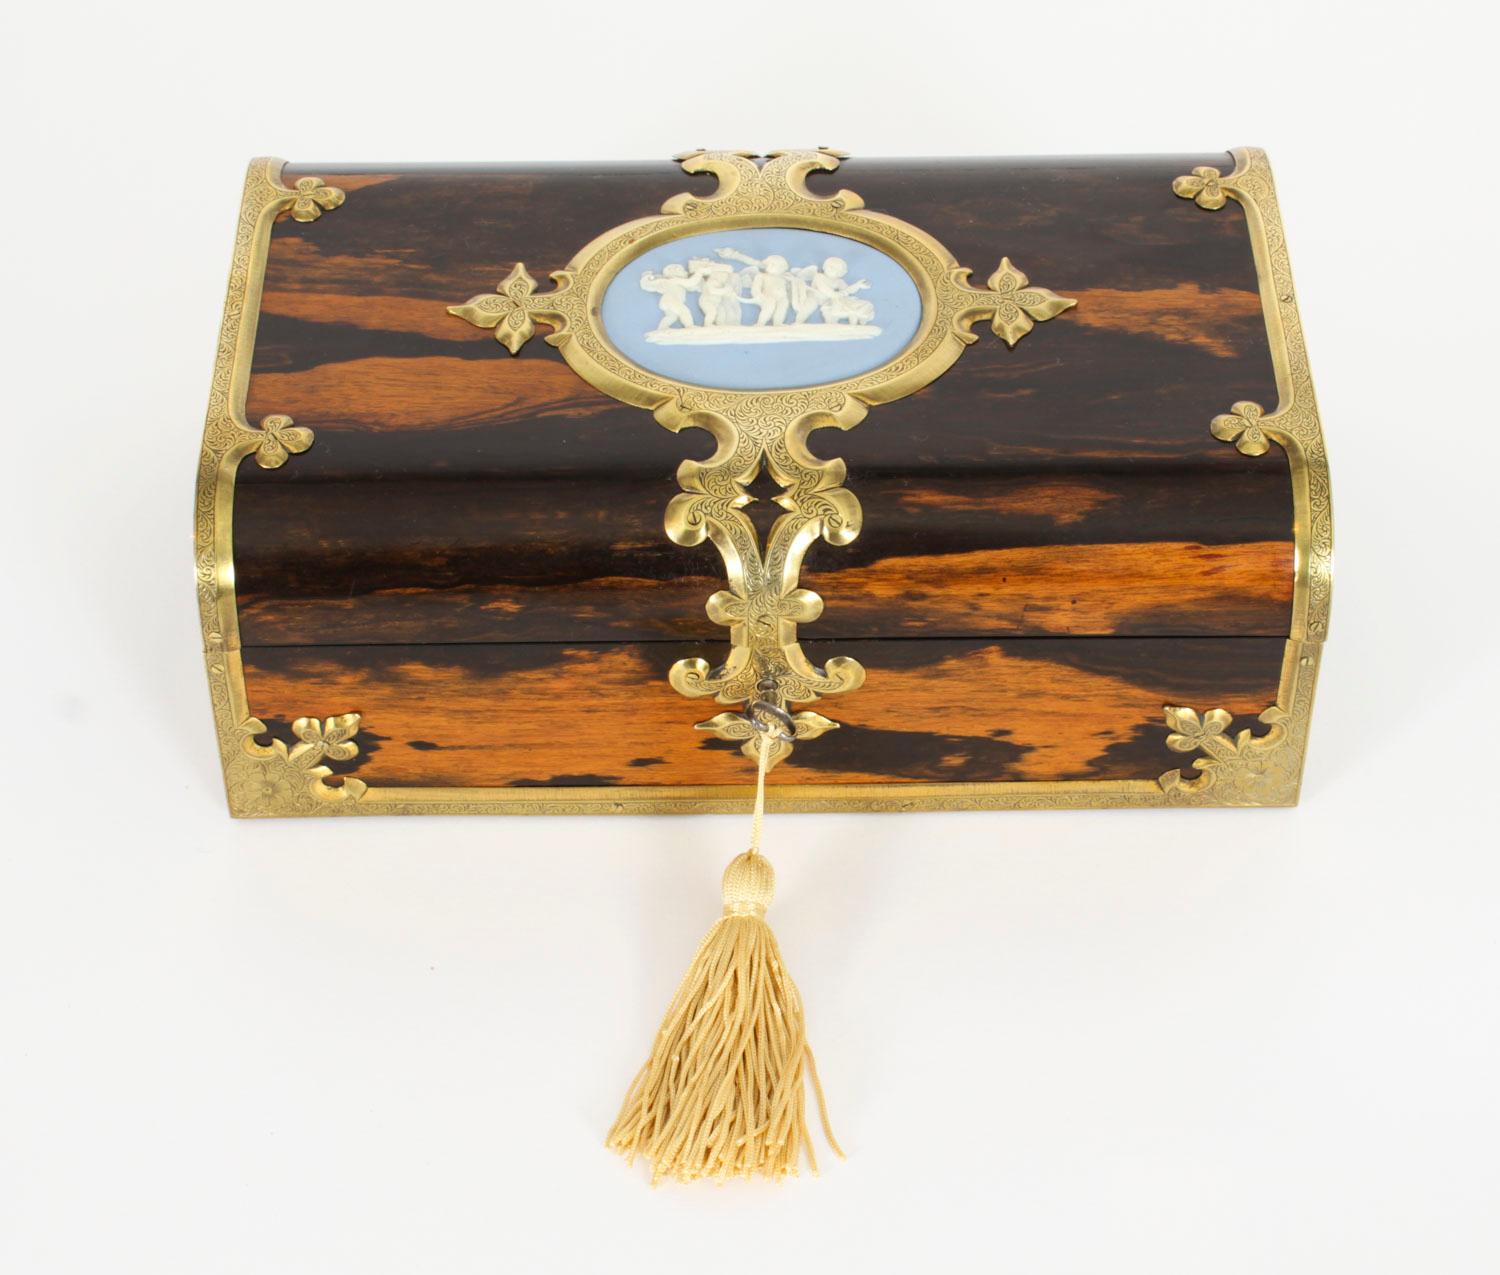 A Victorian ormolu and Jasperware cameo mounted coromandel jewellery casket,  Circa 1880 in date.

The rectangular dome-topped casket features Gothic revival brass mounts tooled with scrolling foliage which frame a central cartouche inset with a